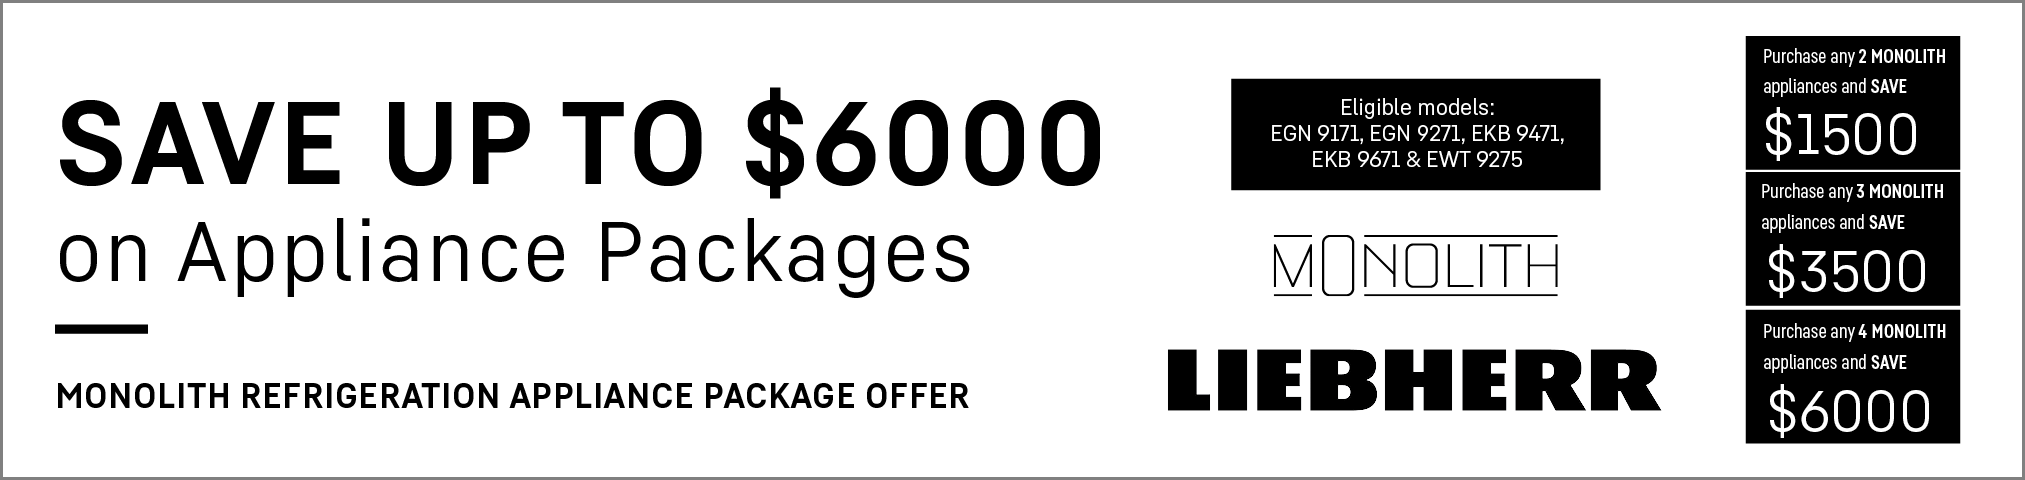 Save Up To $6,000* On Liebherr Appliance Packages